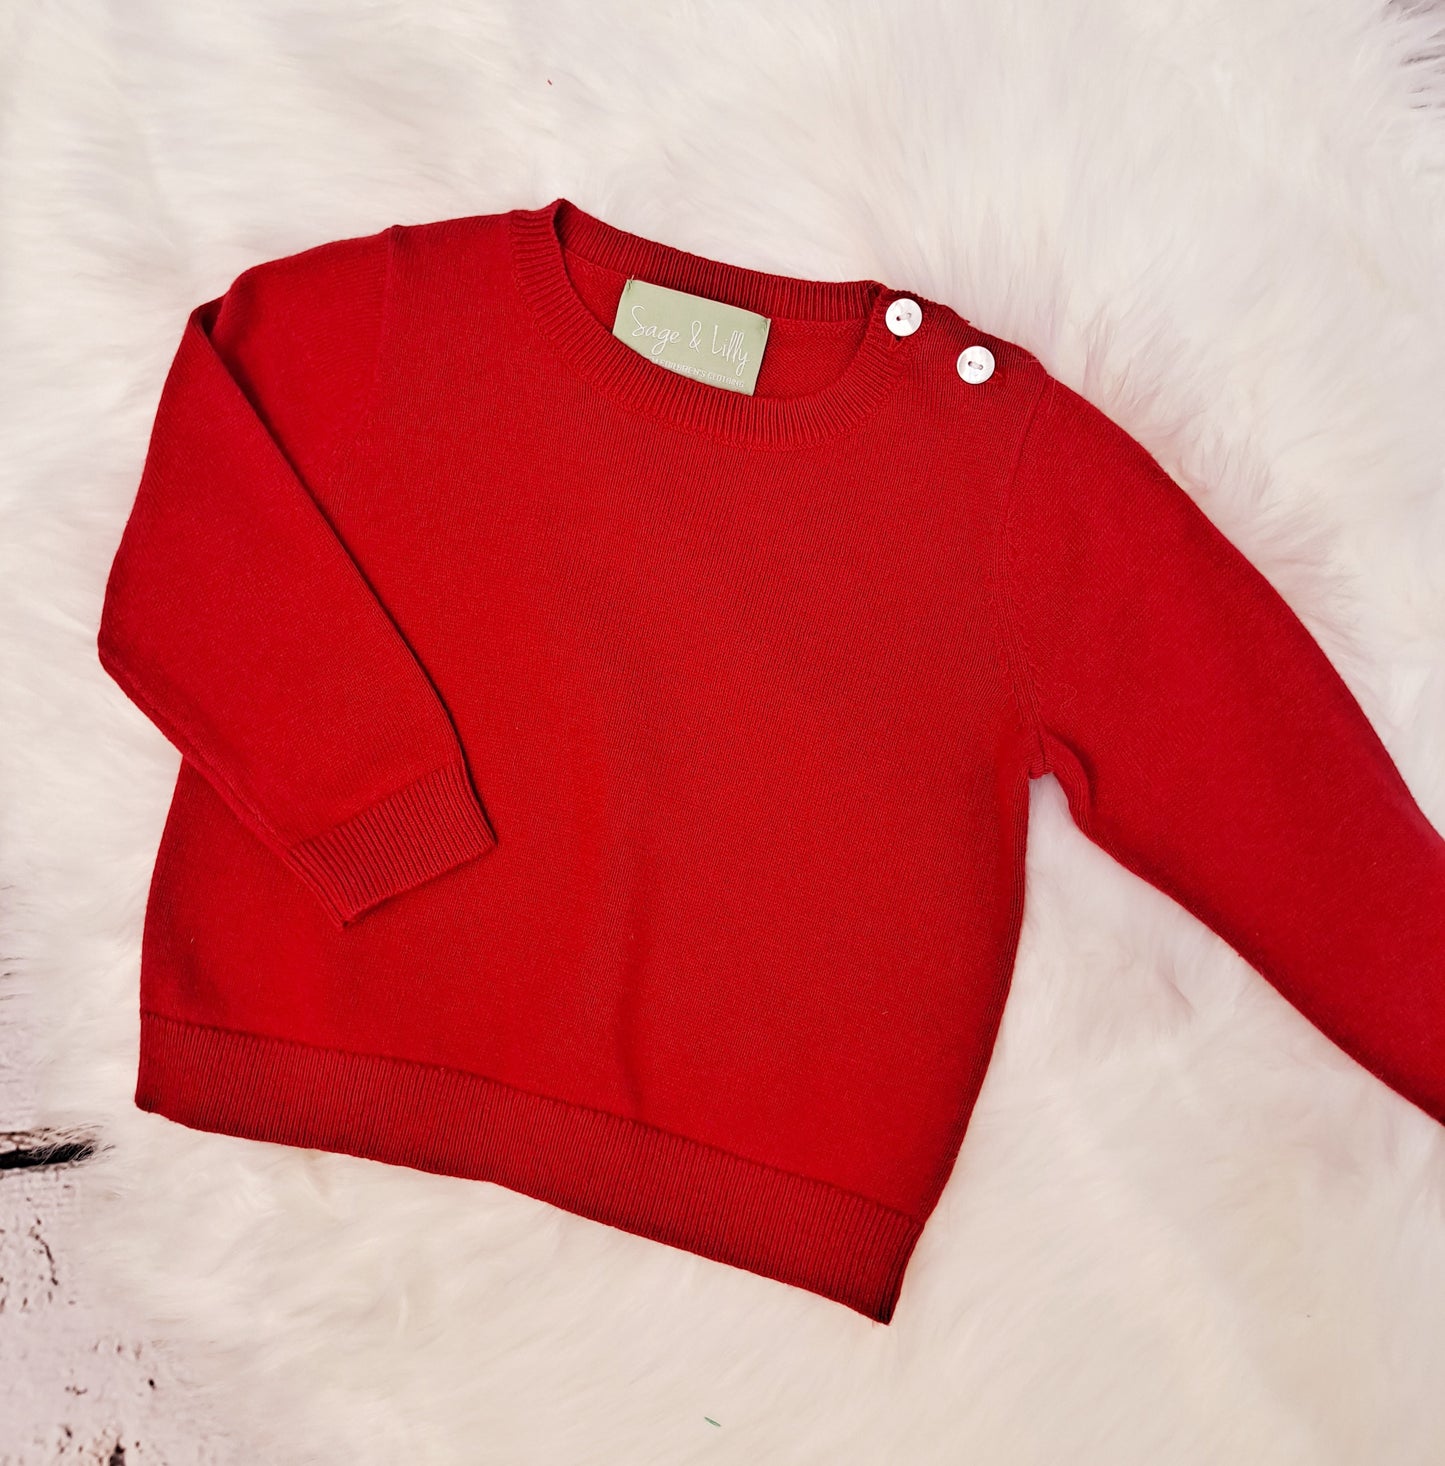 Sage & Lilly - Red Sweater